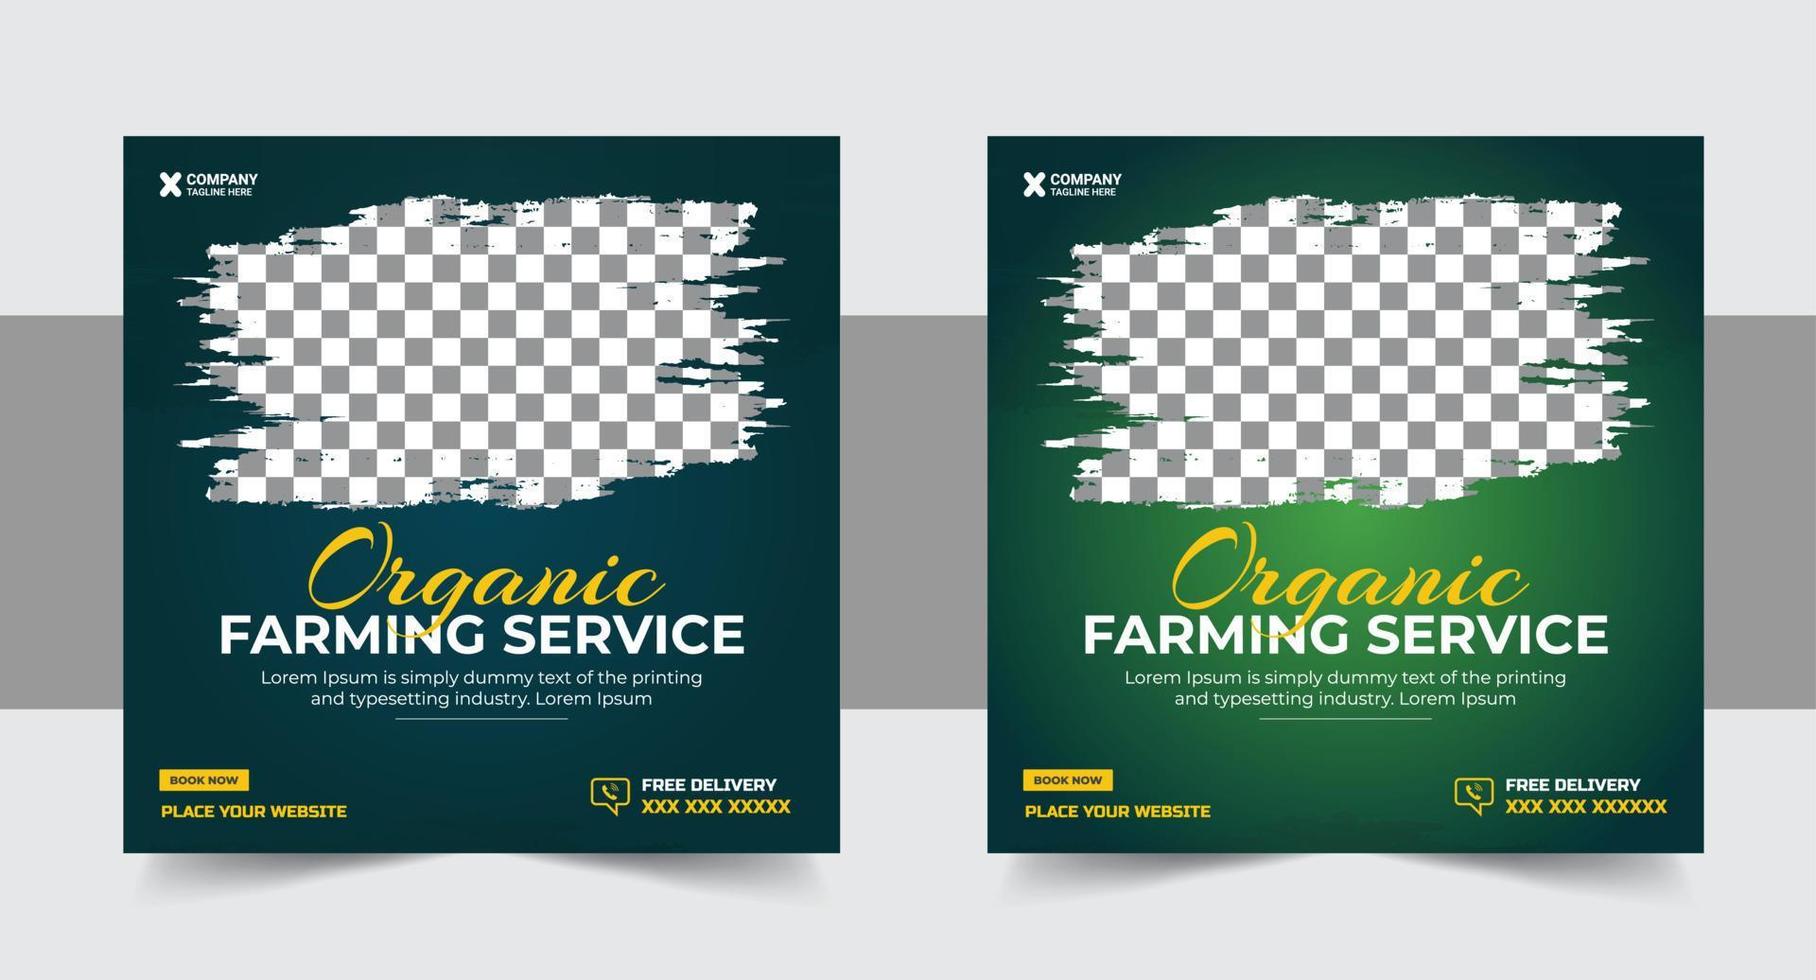 Farm management template vector with green and yellow colors. Lawn and gardening service web banner design for social media marketing. Agro farm service social media post